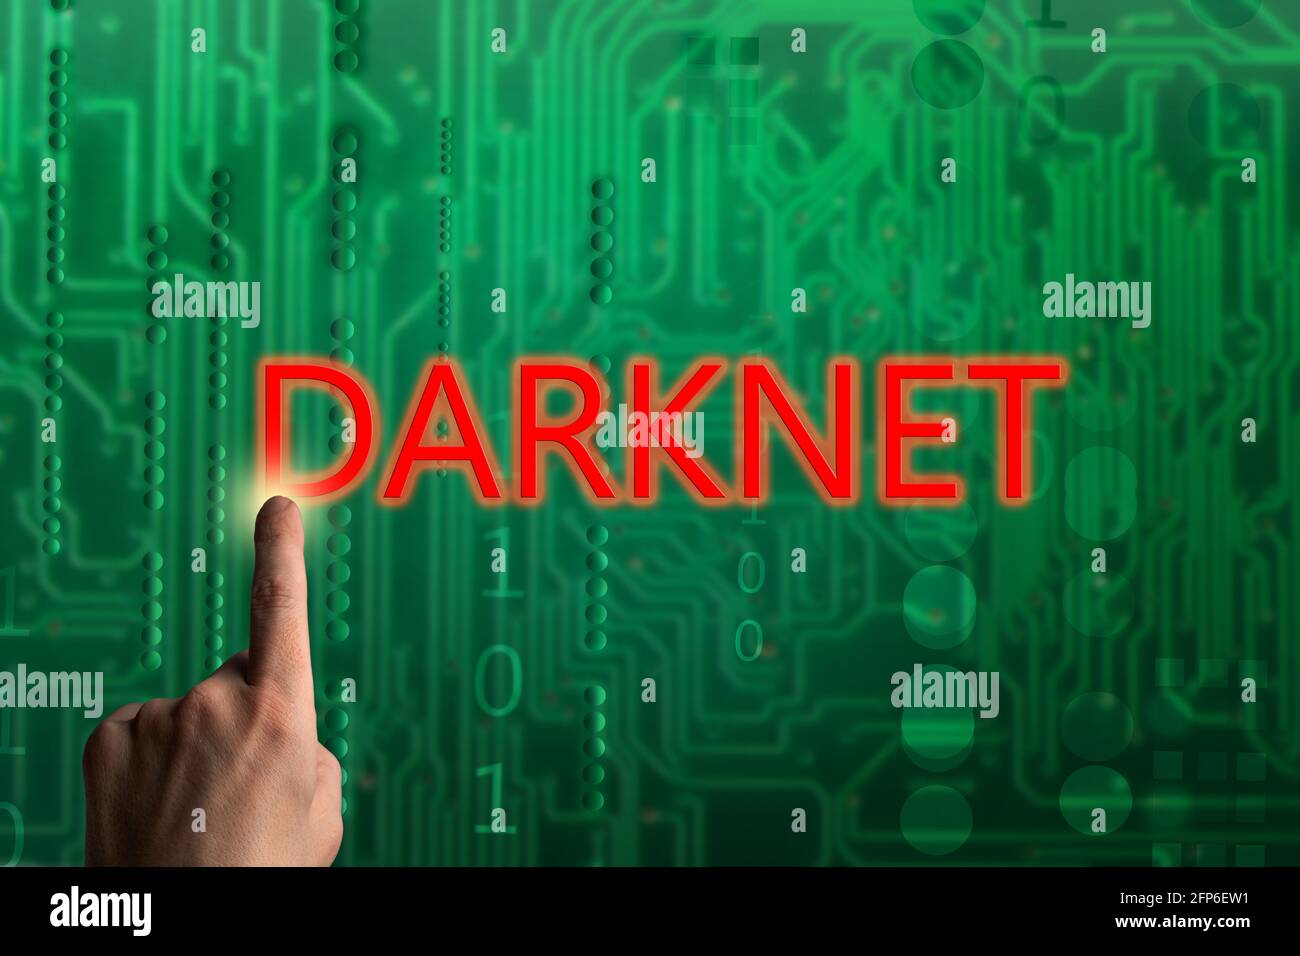 Man using hacking darknet. Data thief, internet fraud, dark web and cyber security concept Stock Photo